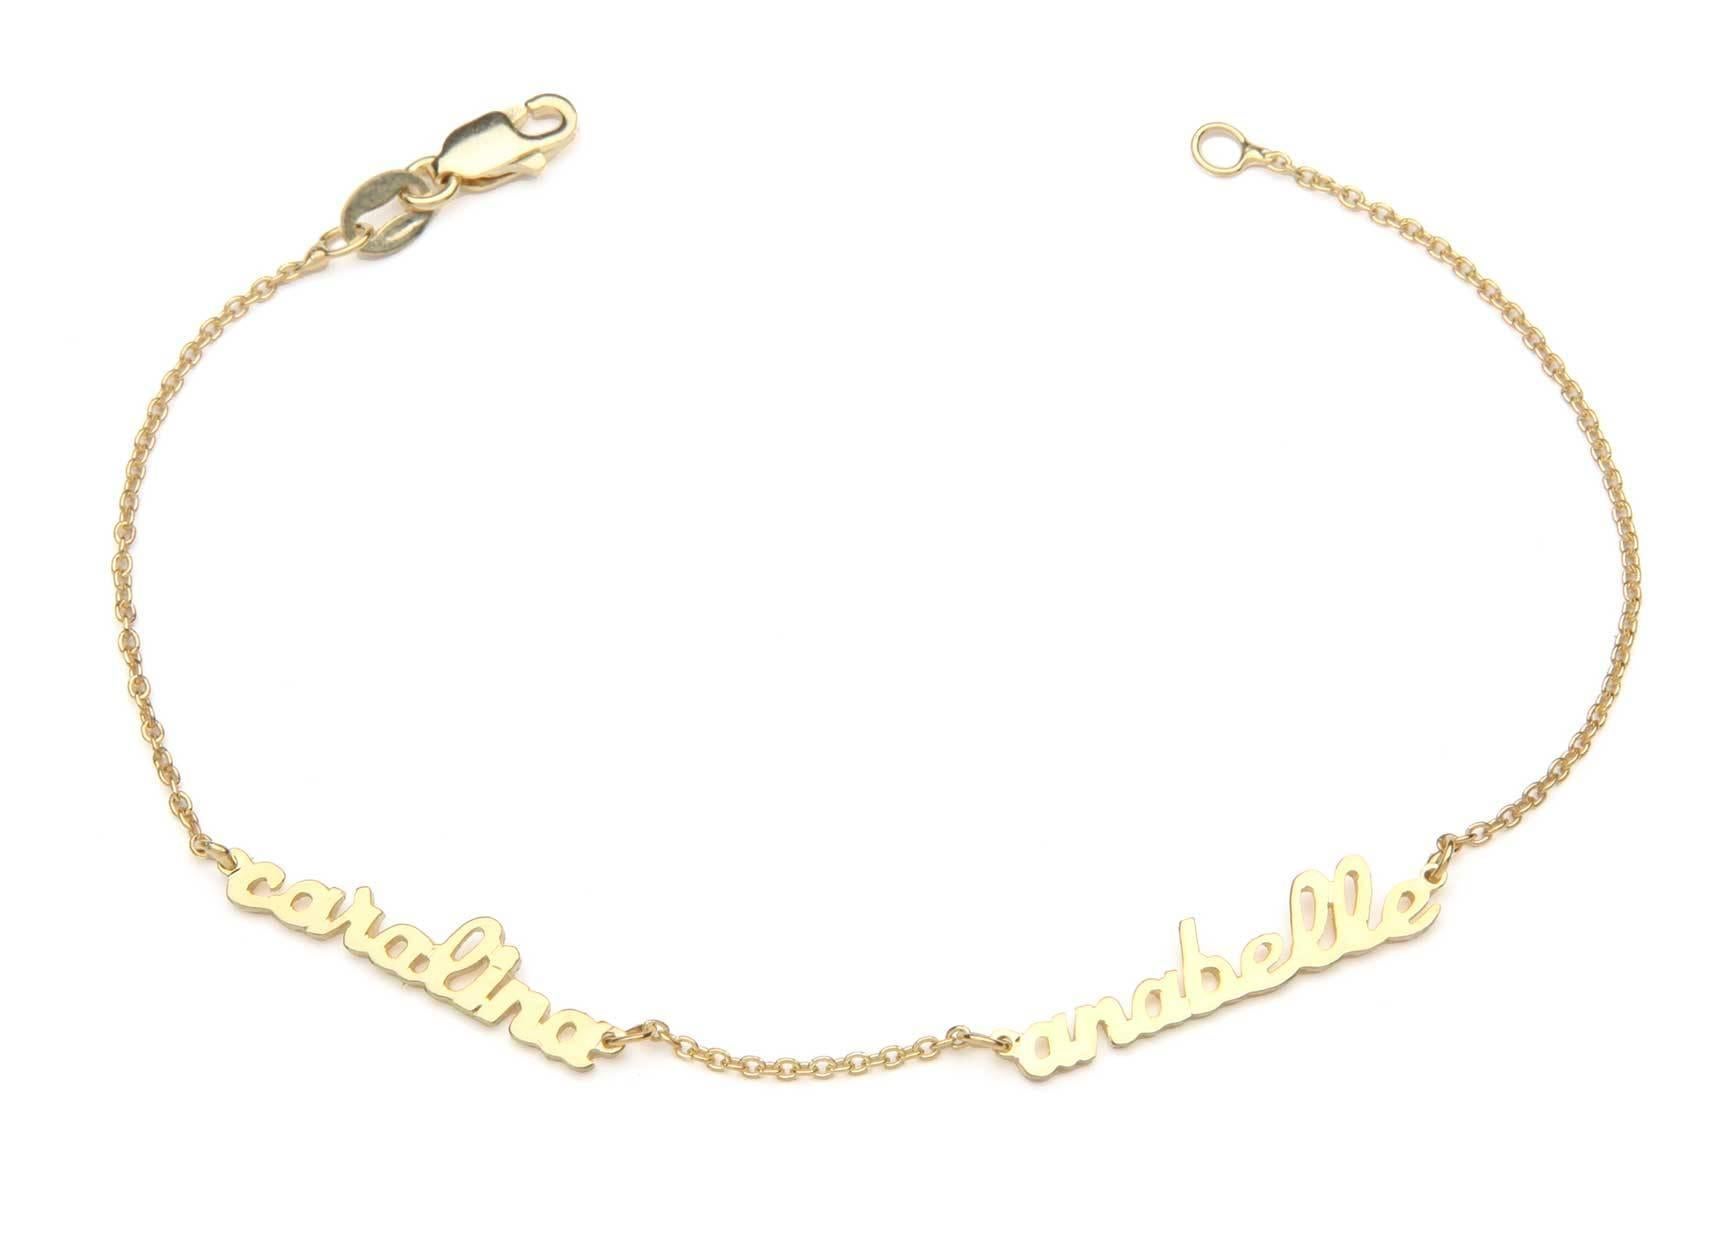 What could be more Special than a personalized gift!

The Personalized Mini Script Name Necklace Shown priced with two Names  -  in Gold Plate. 

It is available with as many names as you like in Silver, Gold Plated or 14kt Gold or Rose Gold.

The